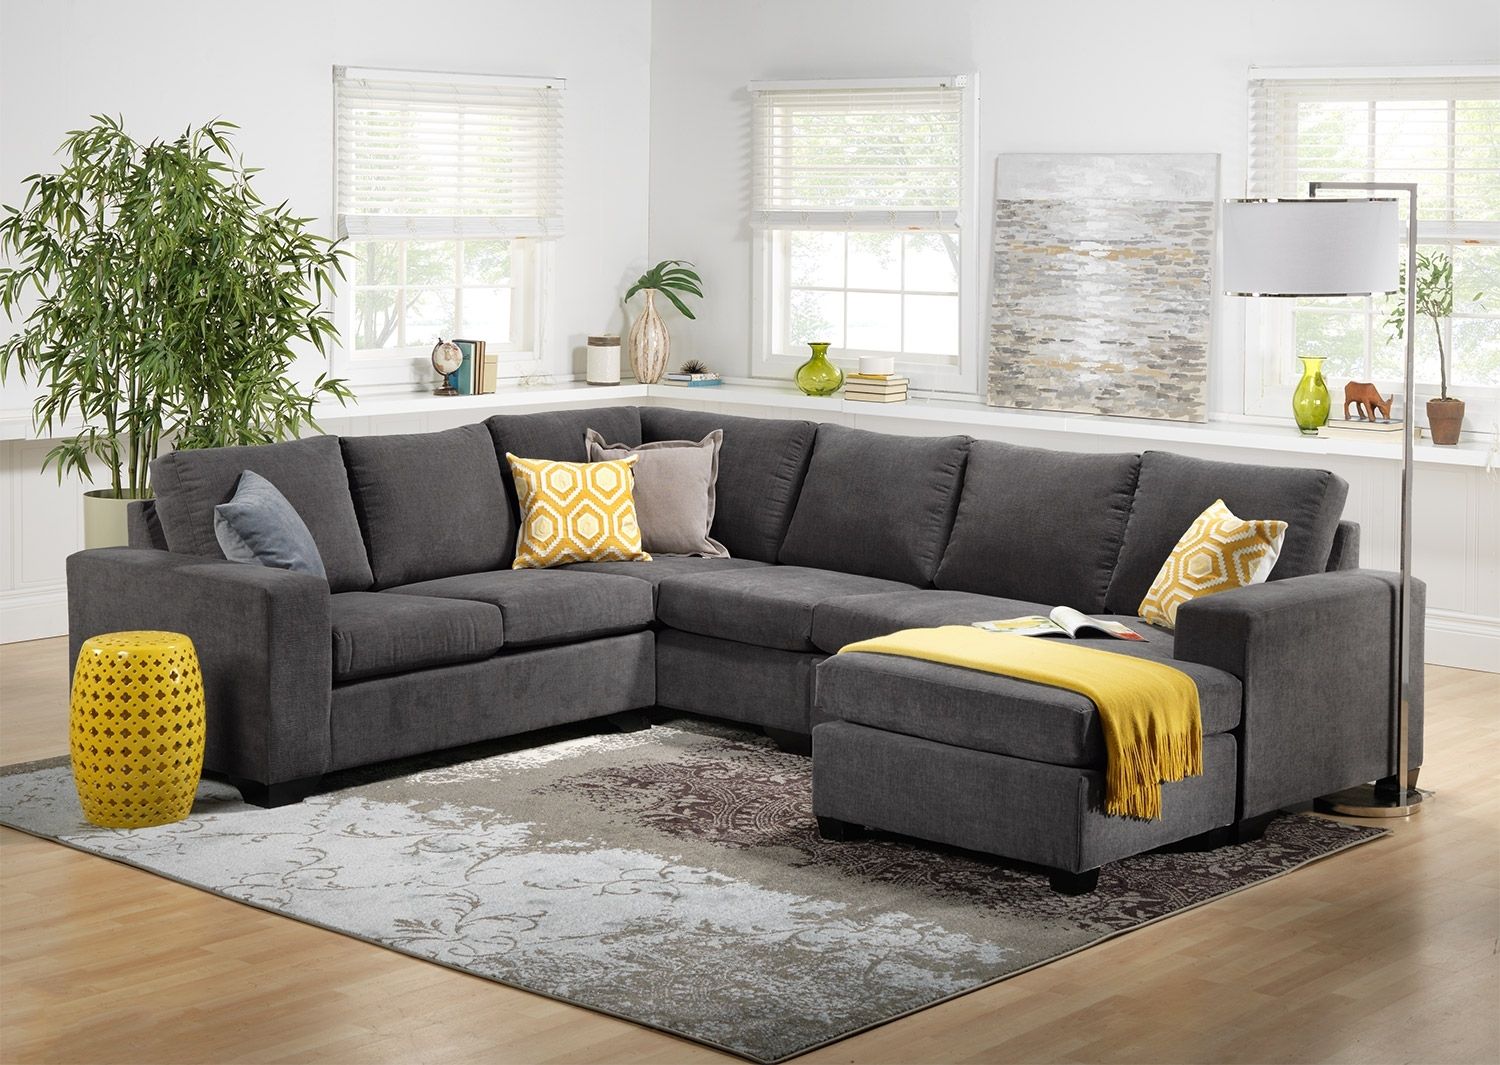 Used Sectional Sofas For Sale Edmonton Best Home Furniture Ideas With Regard To Sectional Sofas At Edmonton (Photo 3 of 10)